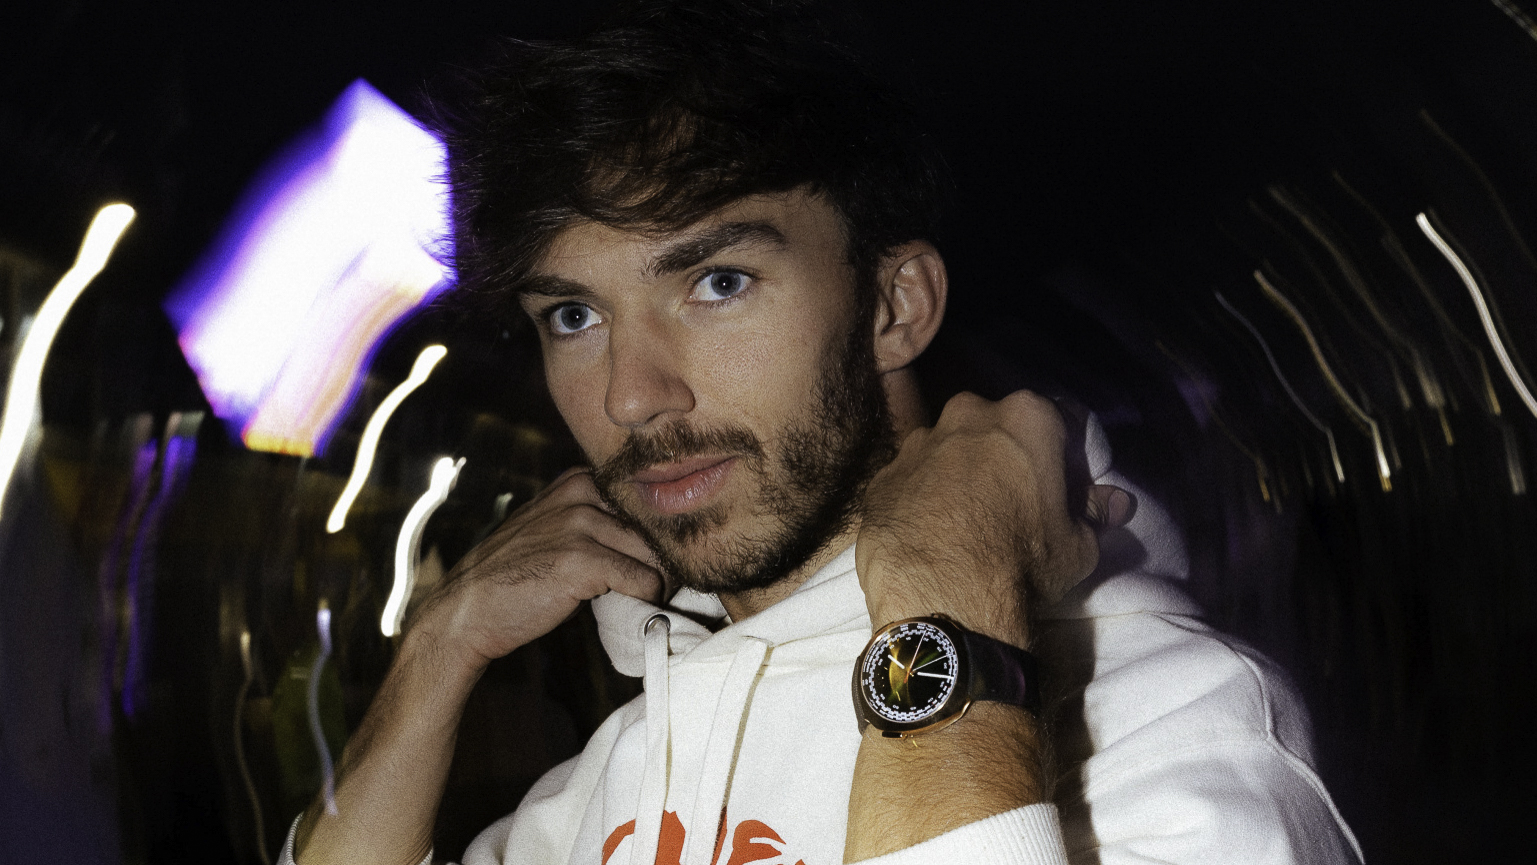 H. Moser joins forces with F1 driver Pierre Gasly